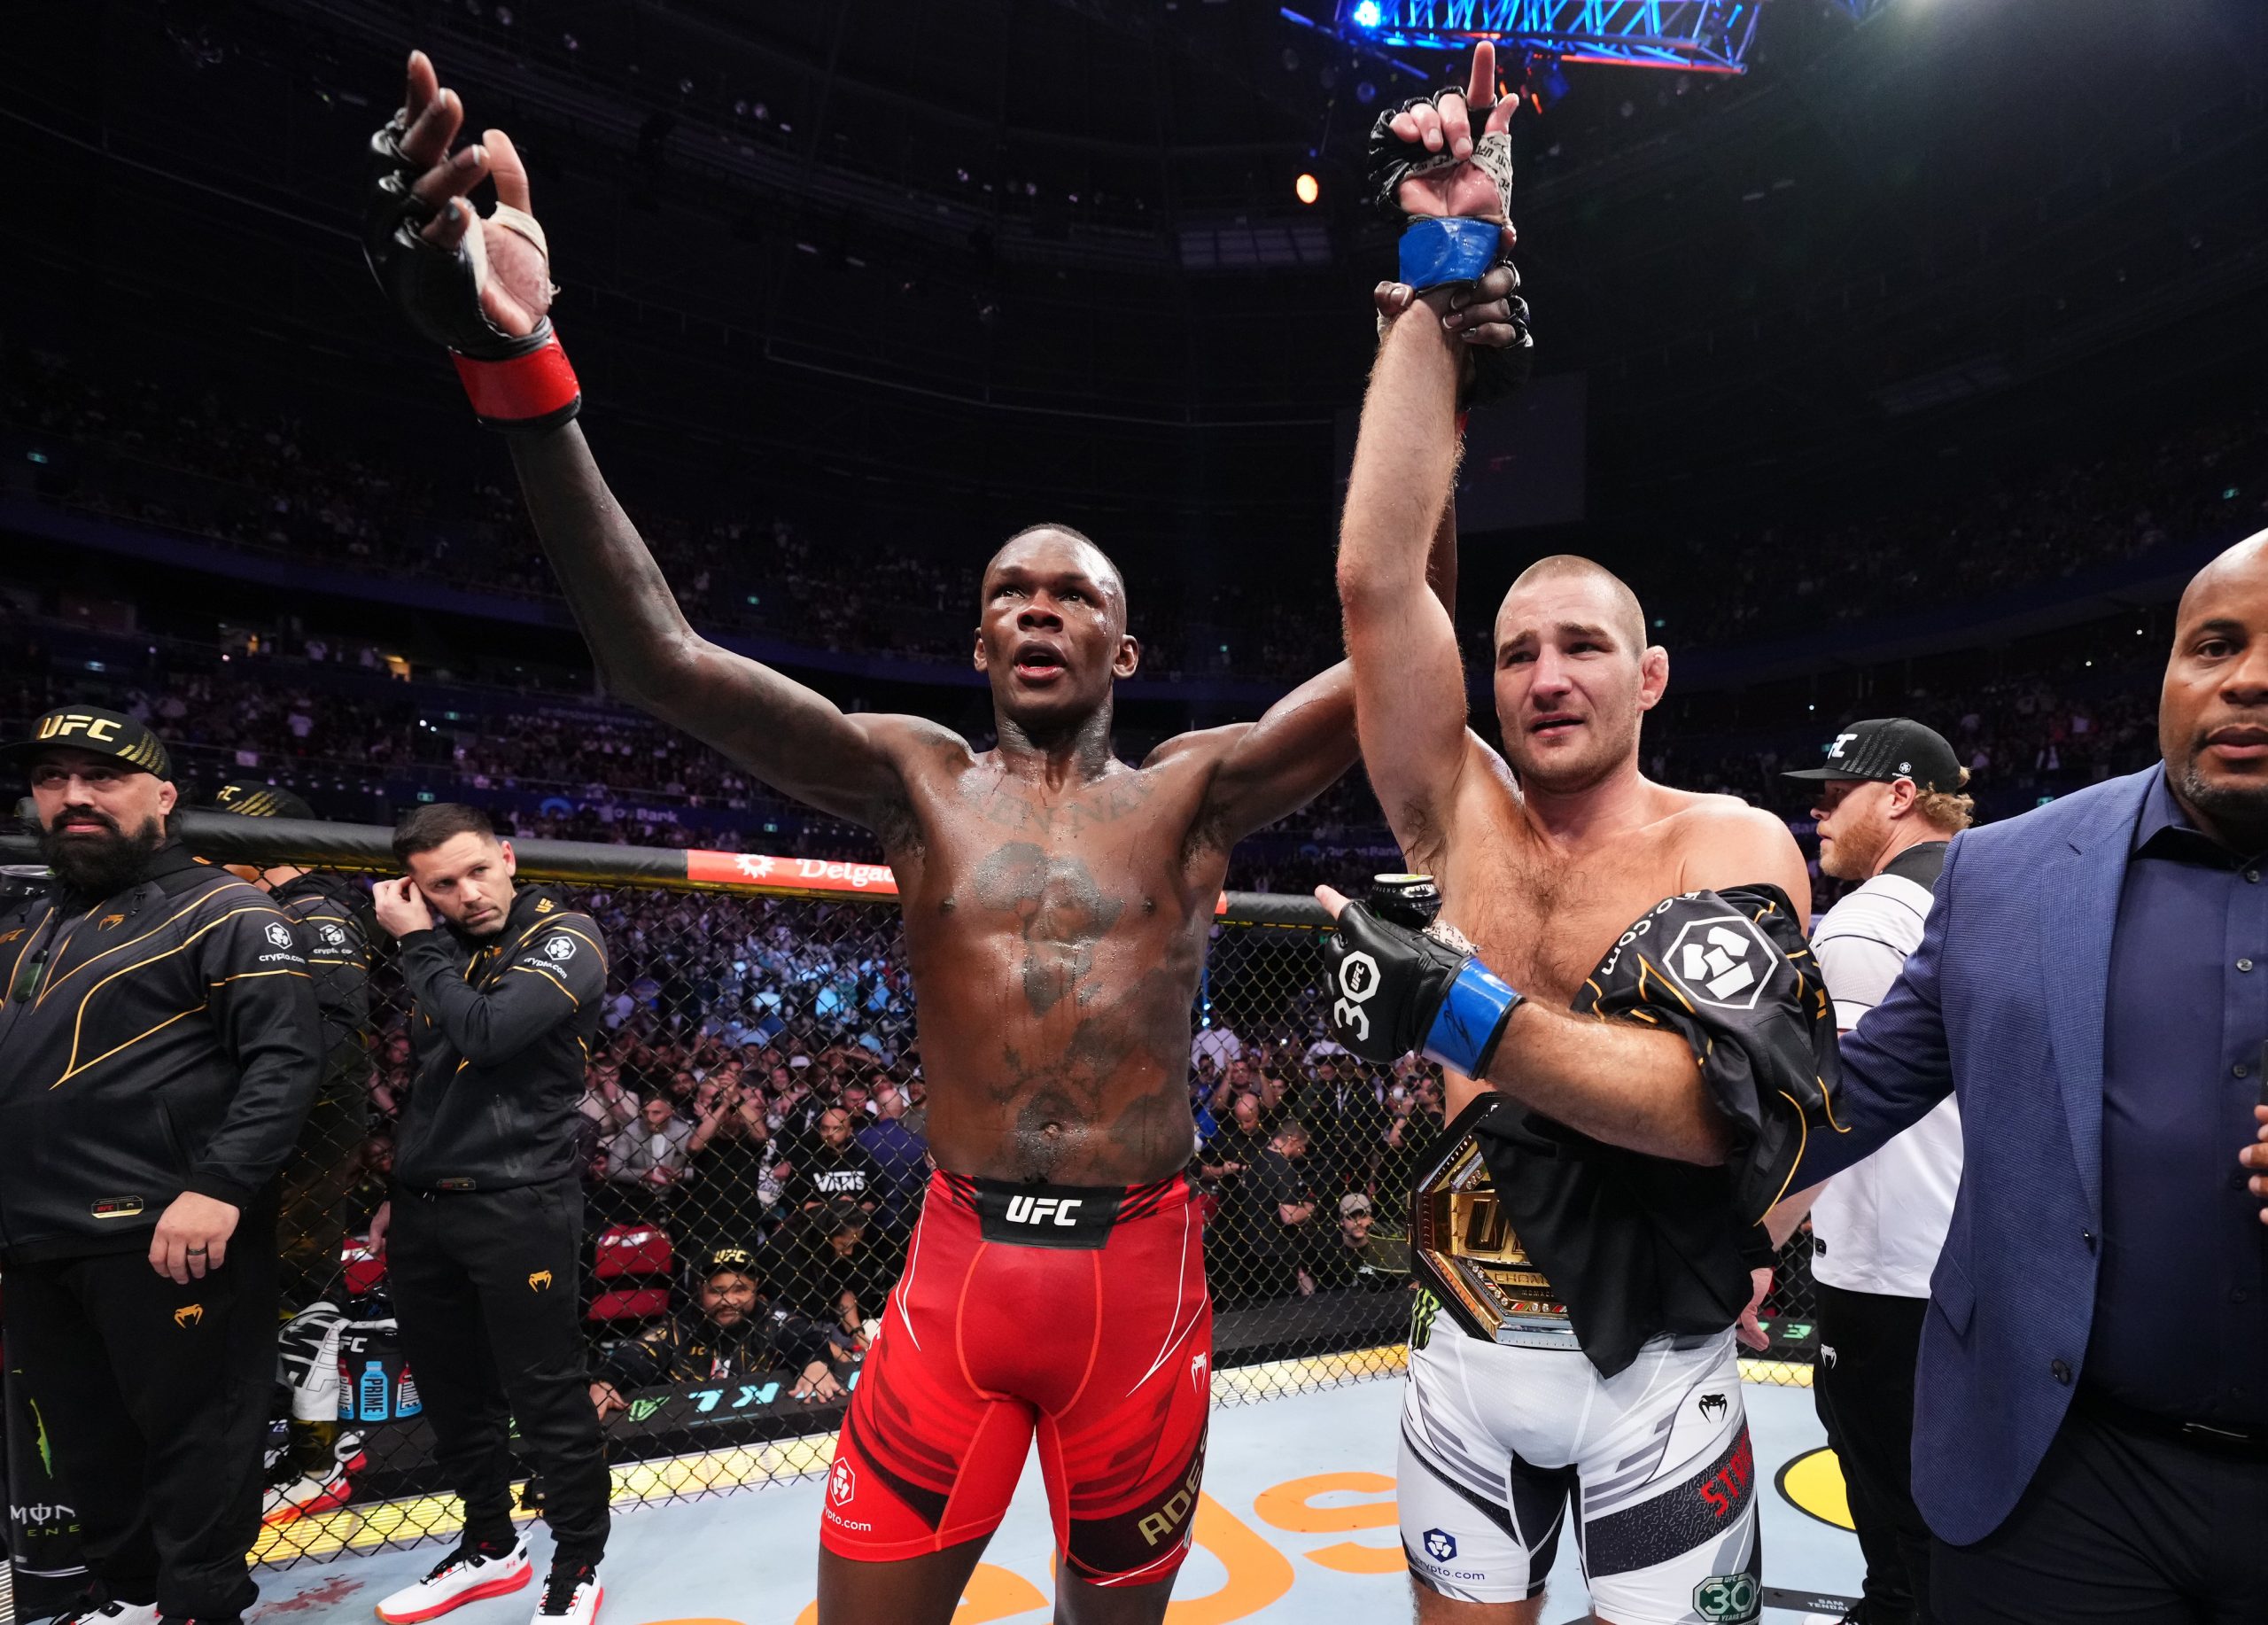 Israel Adesanya Reacts After Losing UFC Title To Strickland